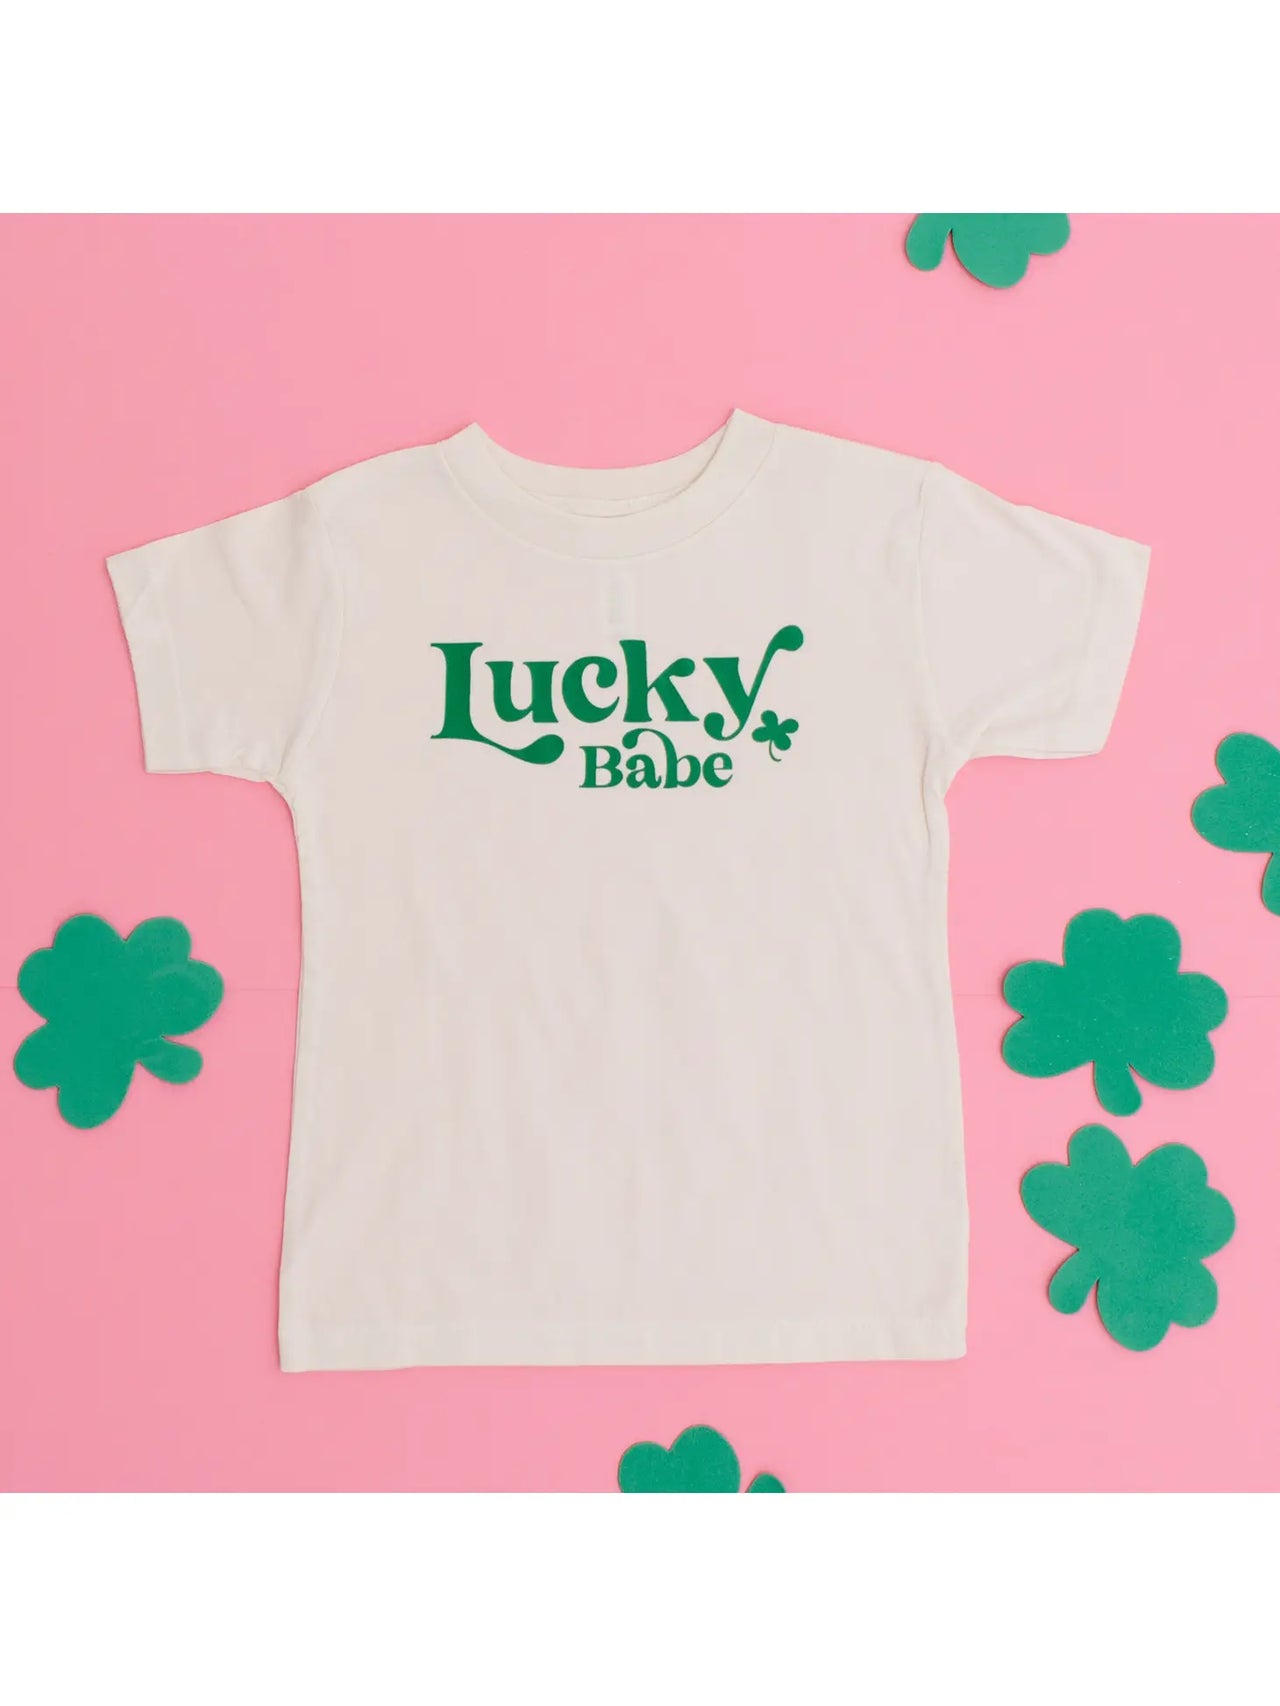 Toddler and Youth T-Shirt || Lucky Babe